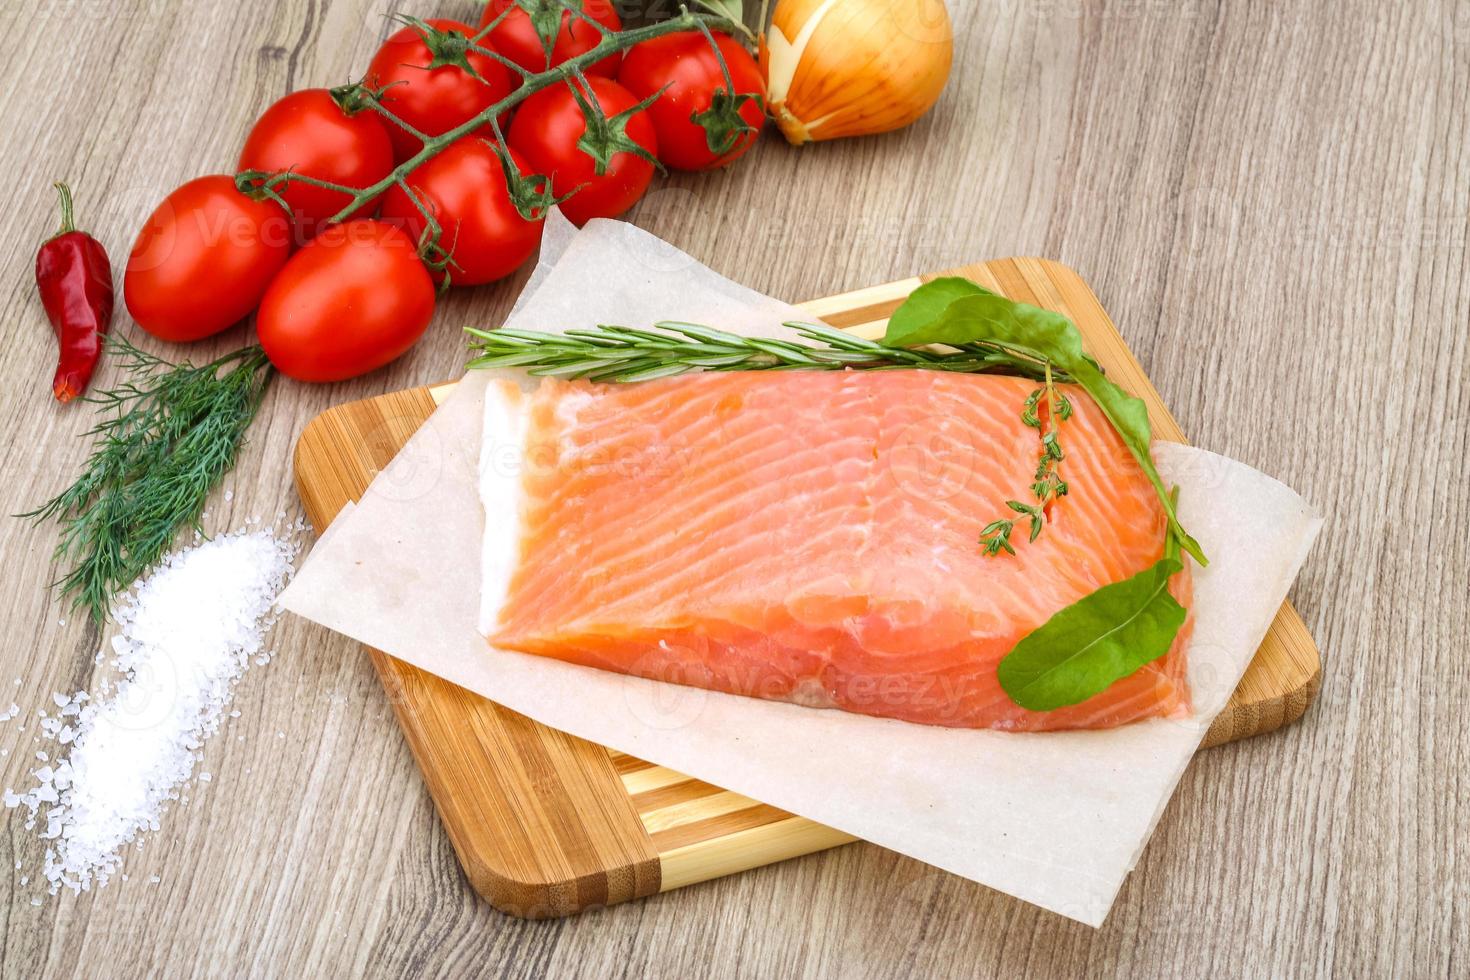 Salted salmon on wooden board and wooden background photo